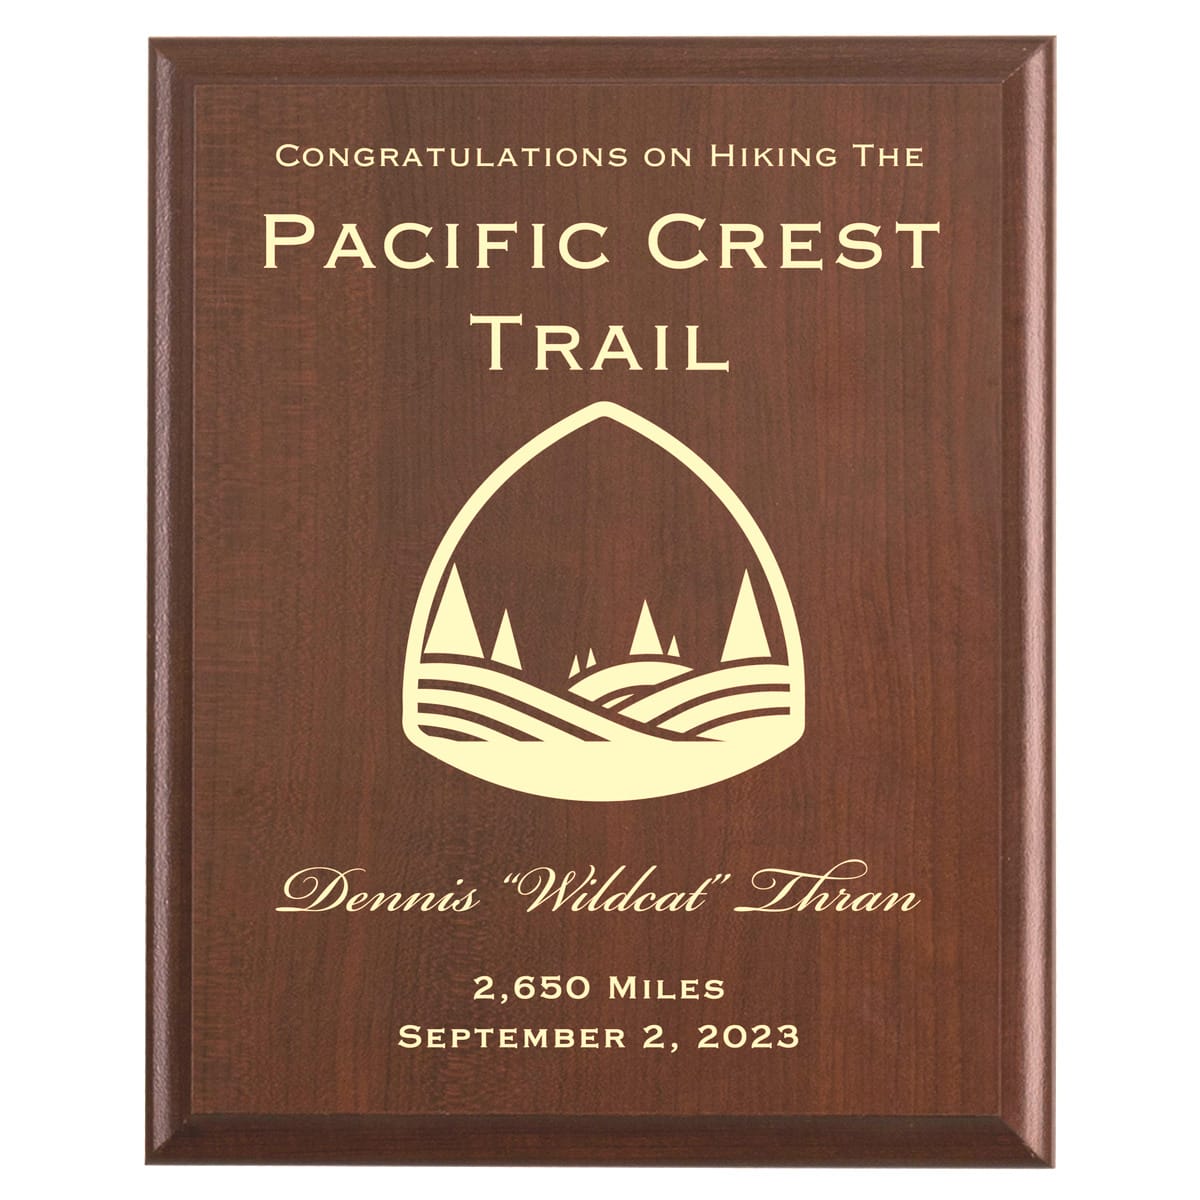 Plaque photo: Pacific Crest Trail Thru Hike Award design with free personalization. Wood style finish with customized text.